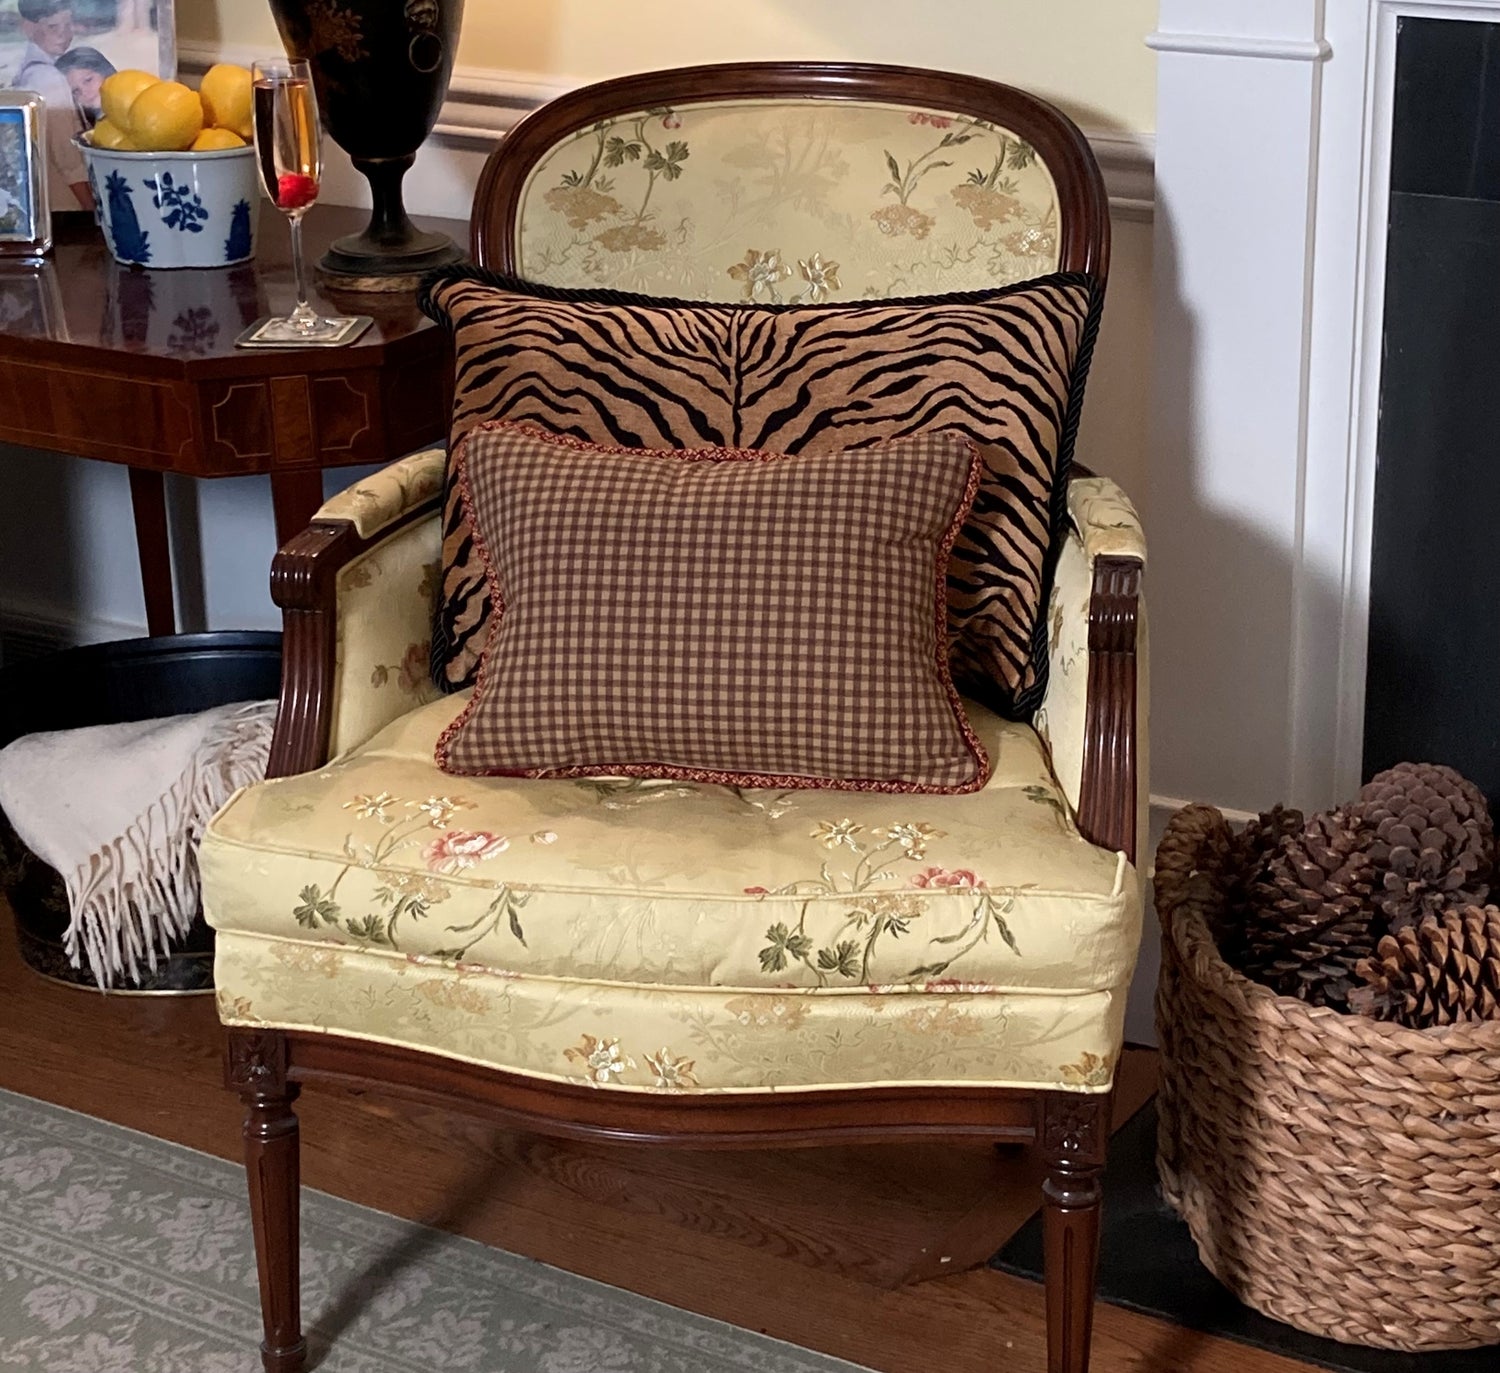 Two French Roosters Pillow Corner Toile in Mustard with Brown Gingham 12 X 16 Rectangle Designer Throw Pillow on Chair with Down Feather Insert